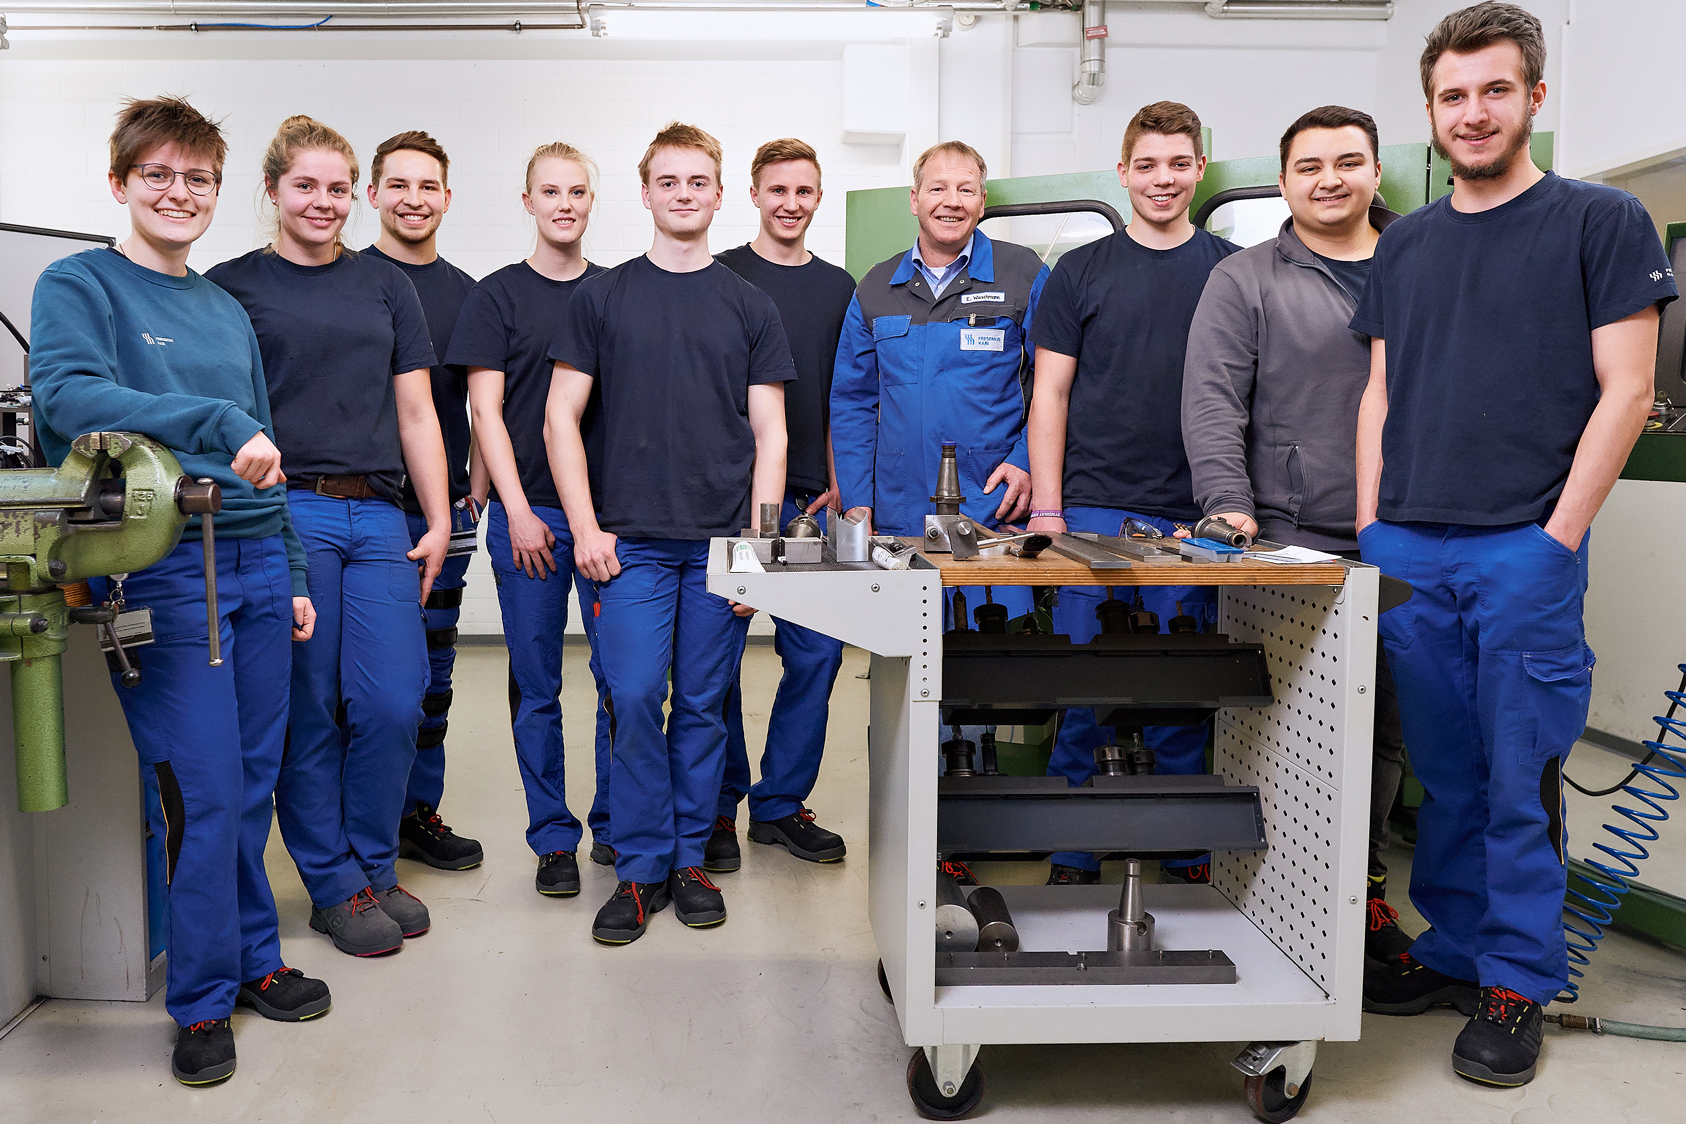 Eric teaches industrial mechanics and mechatronics apprentices in the workshop at the Fresenius Kabi plant in Friedberg, Germany